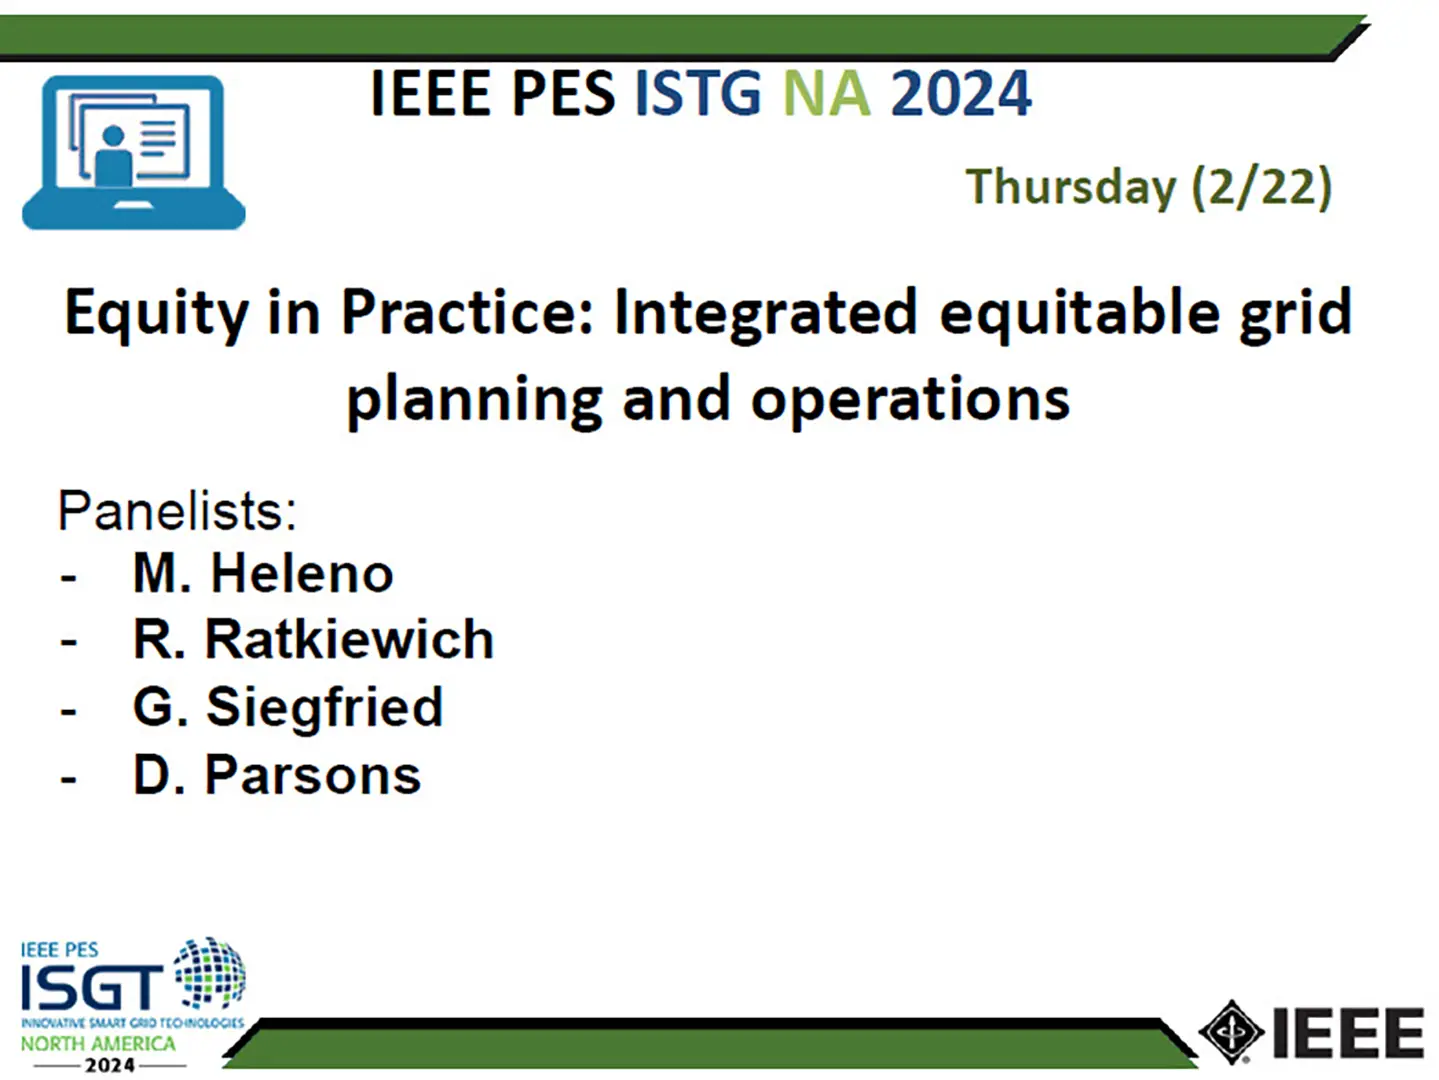 Equity in Practice: Integrated equitable grid planning and operations (slides)